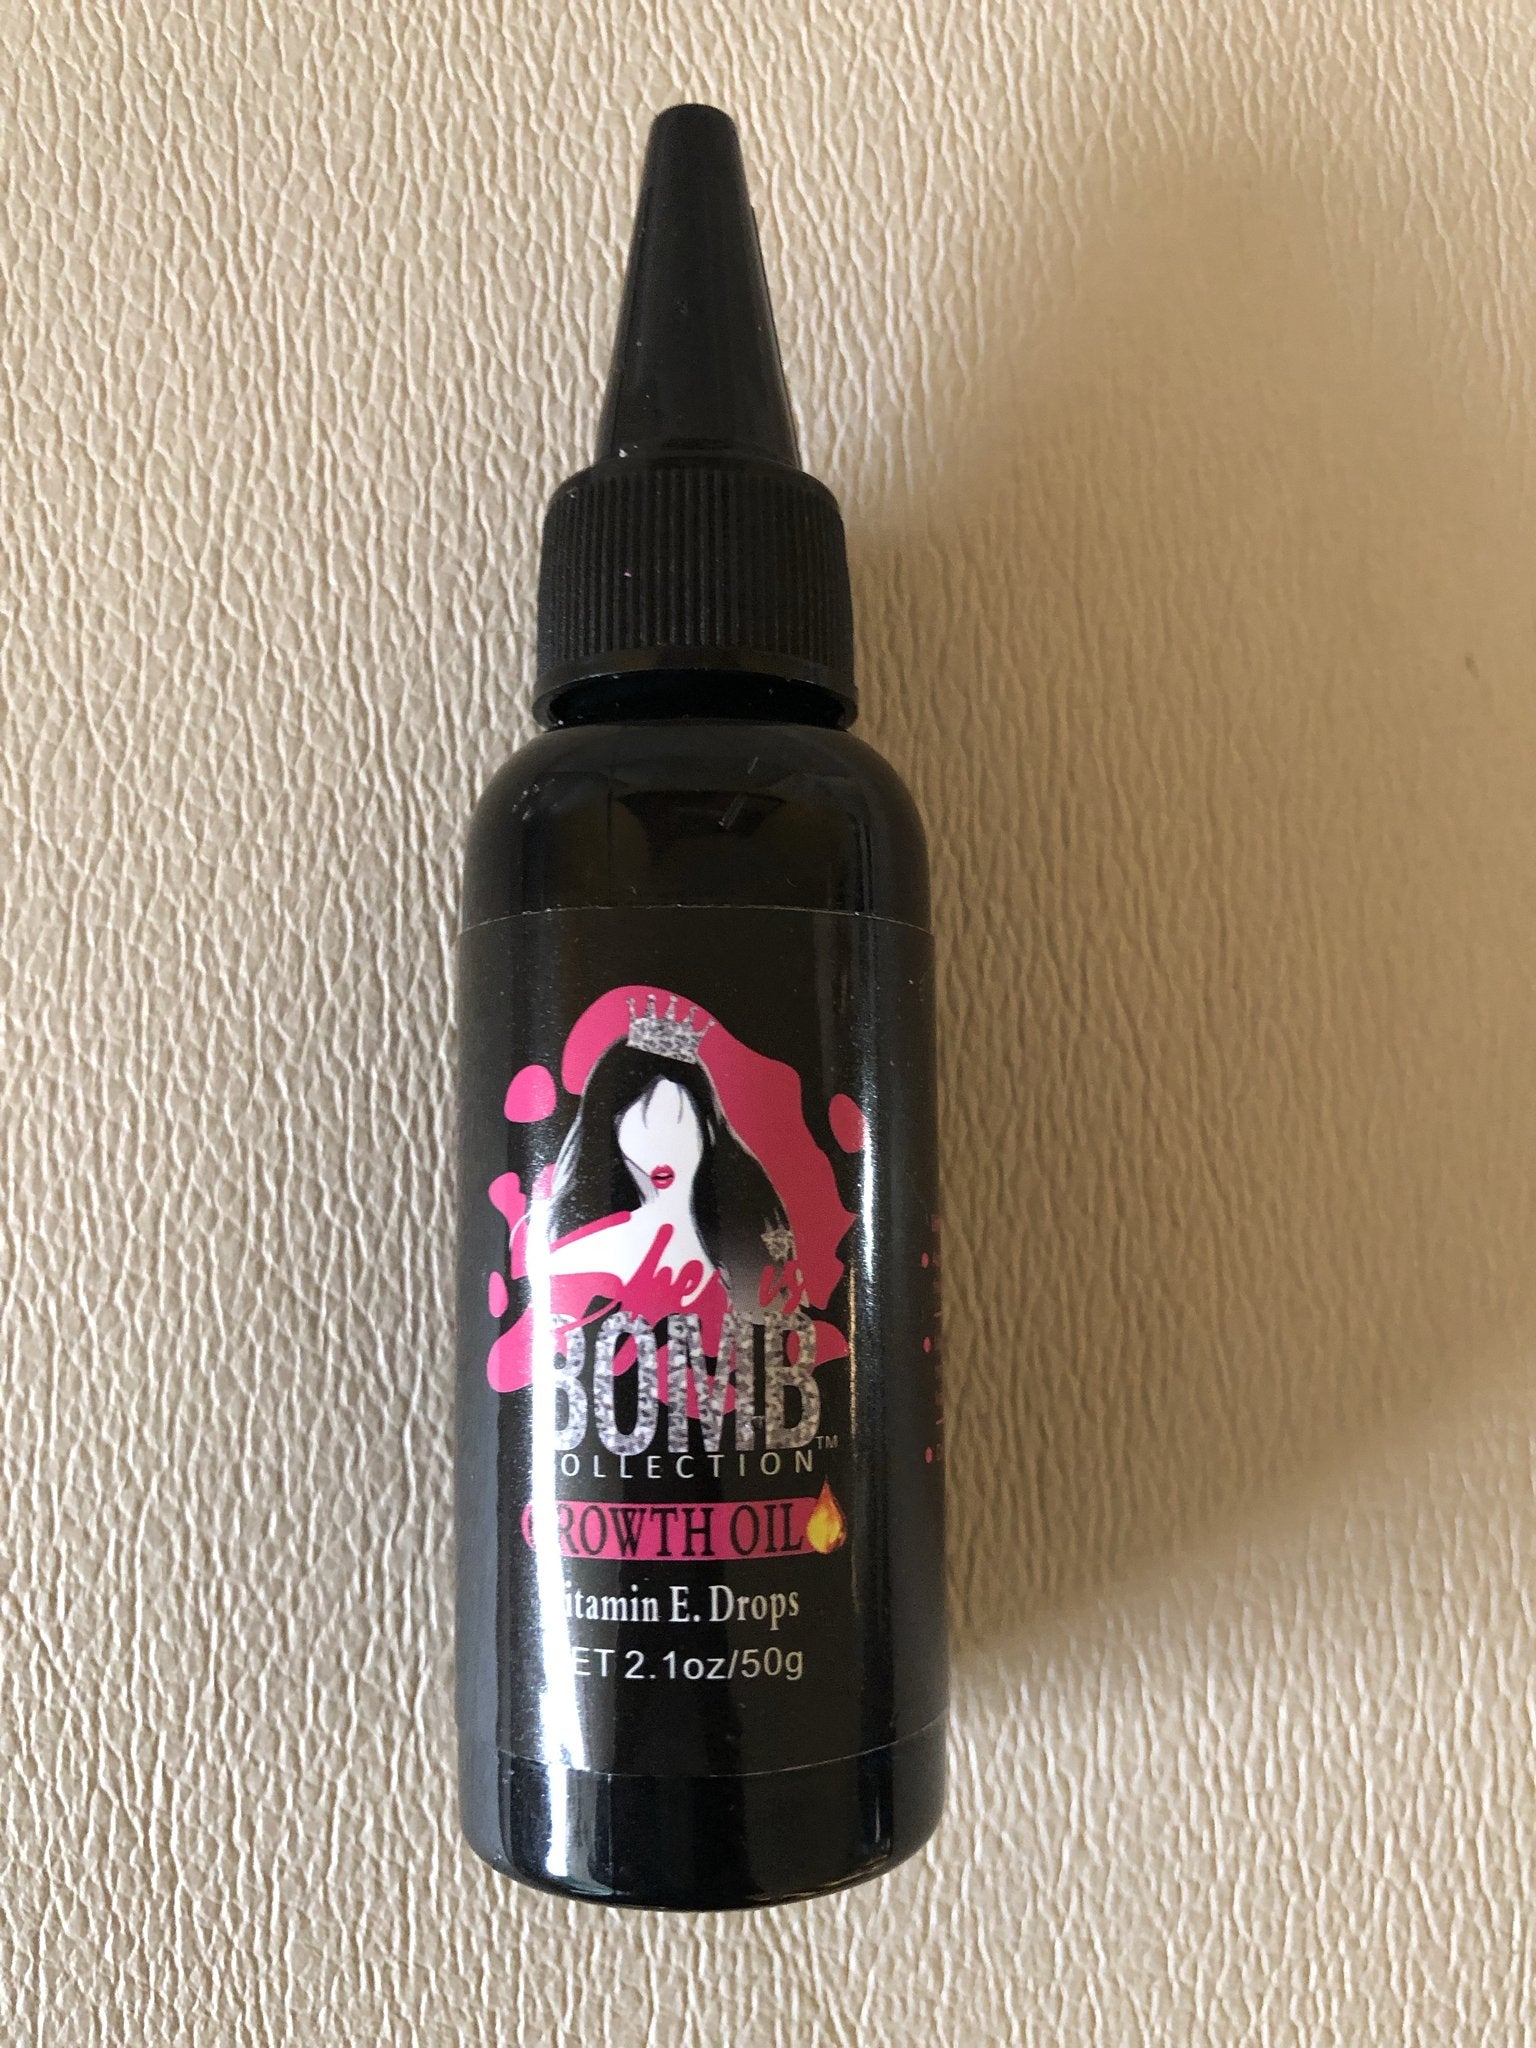 She is Bomb- Growth Oil 2.1oz